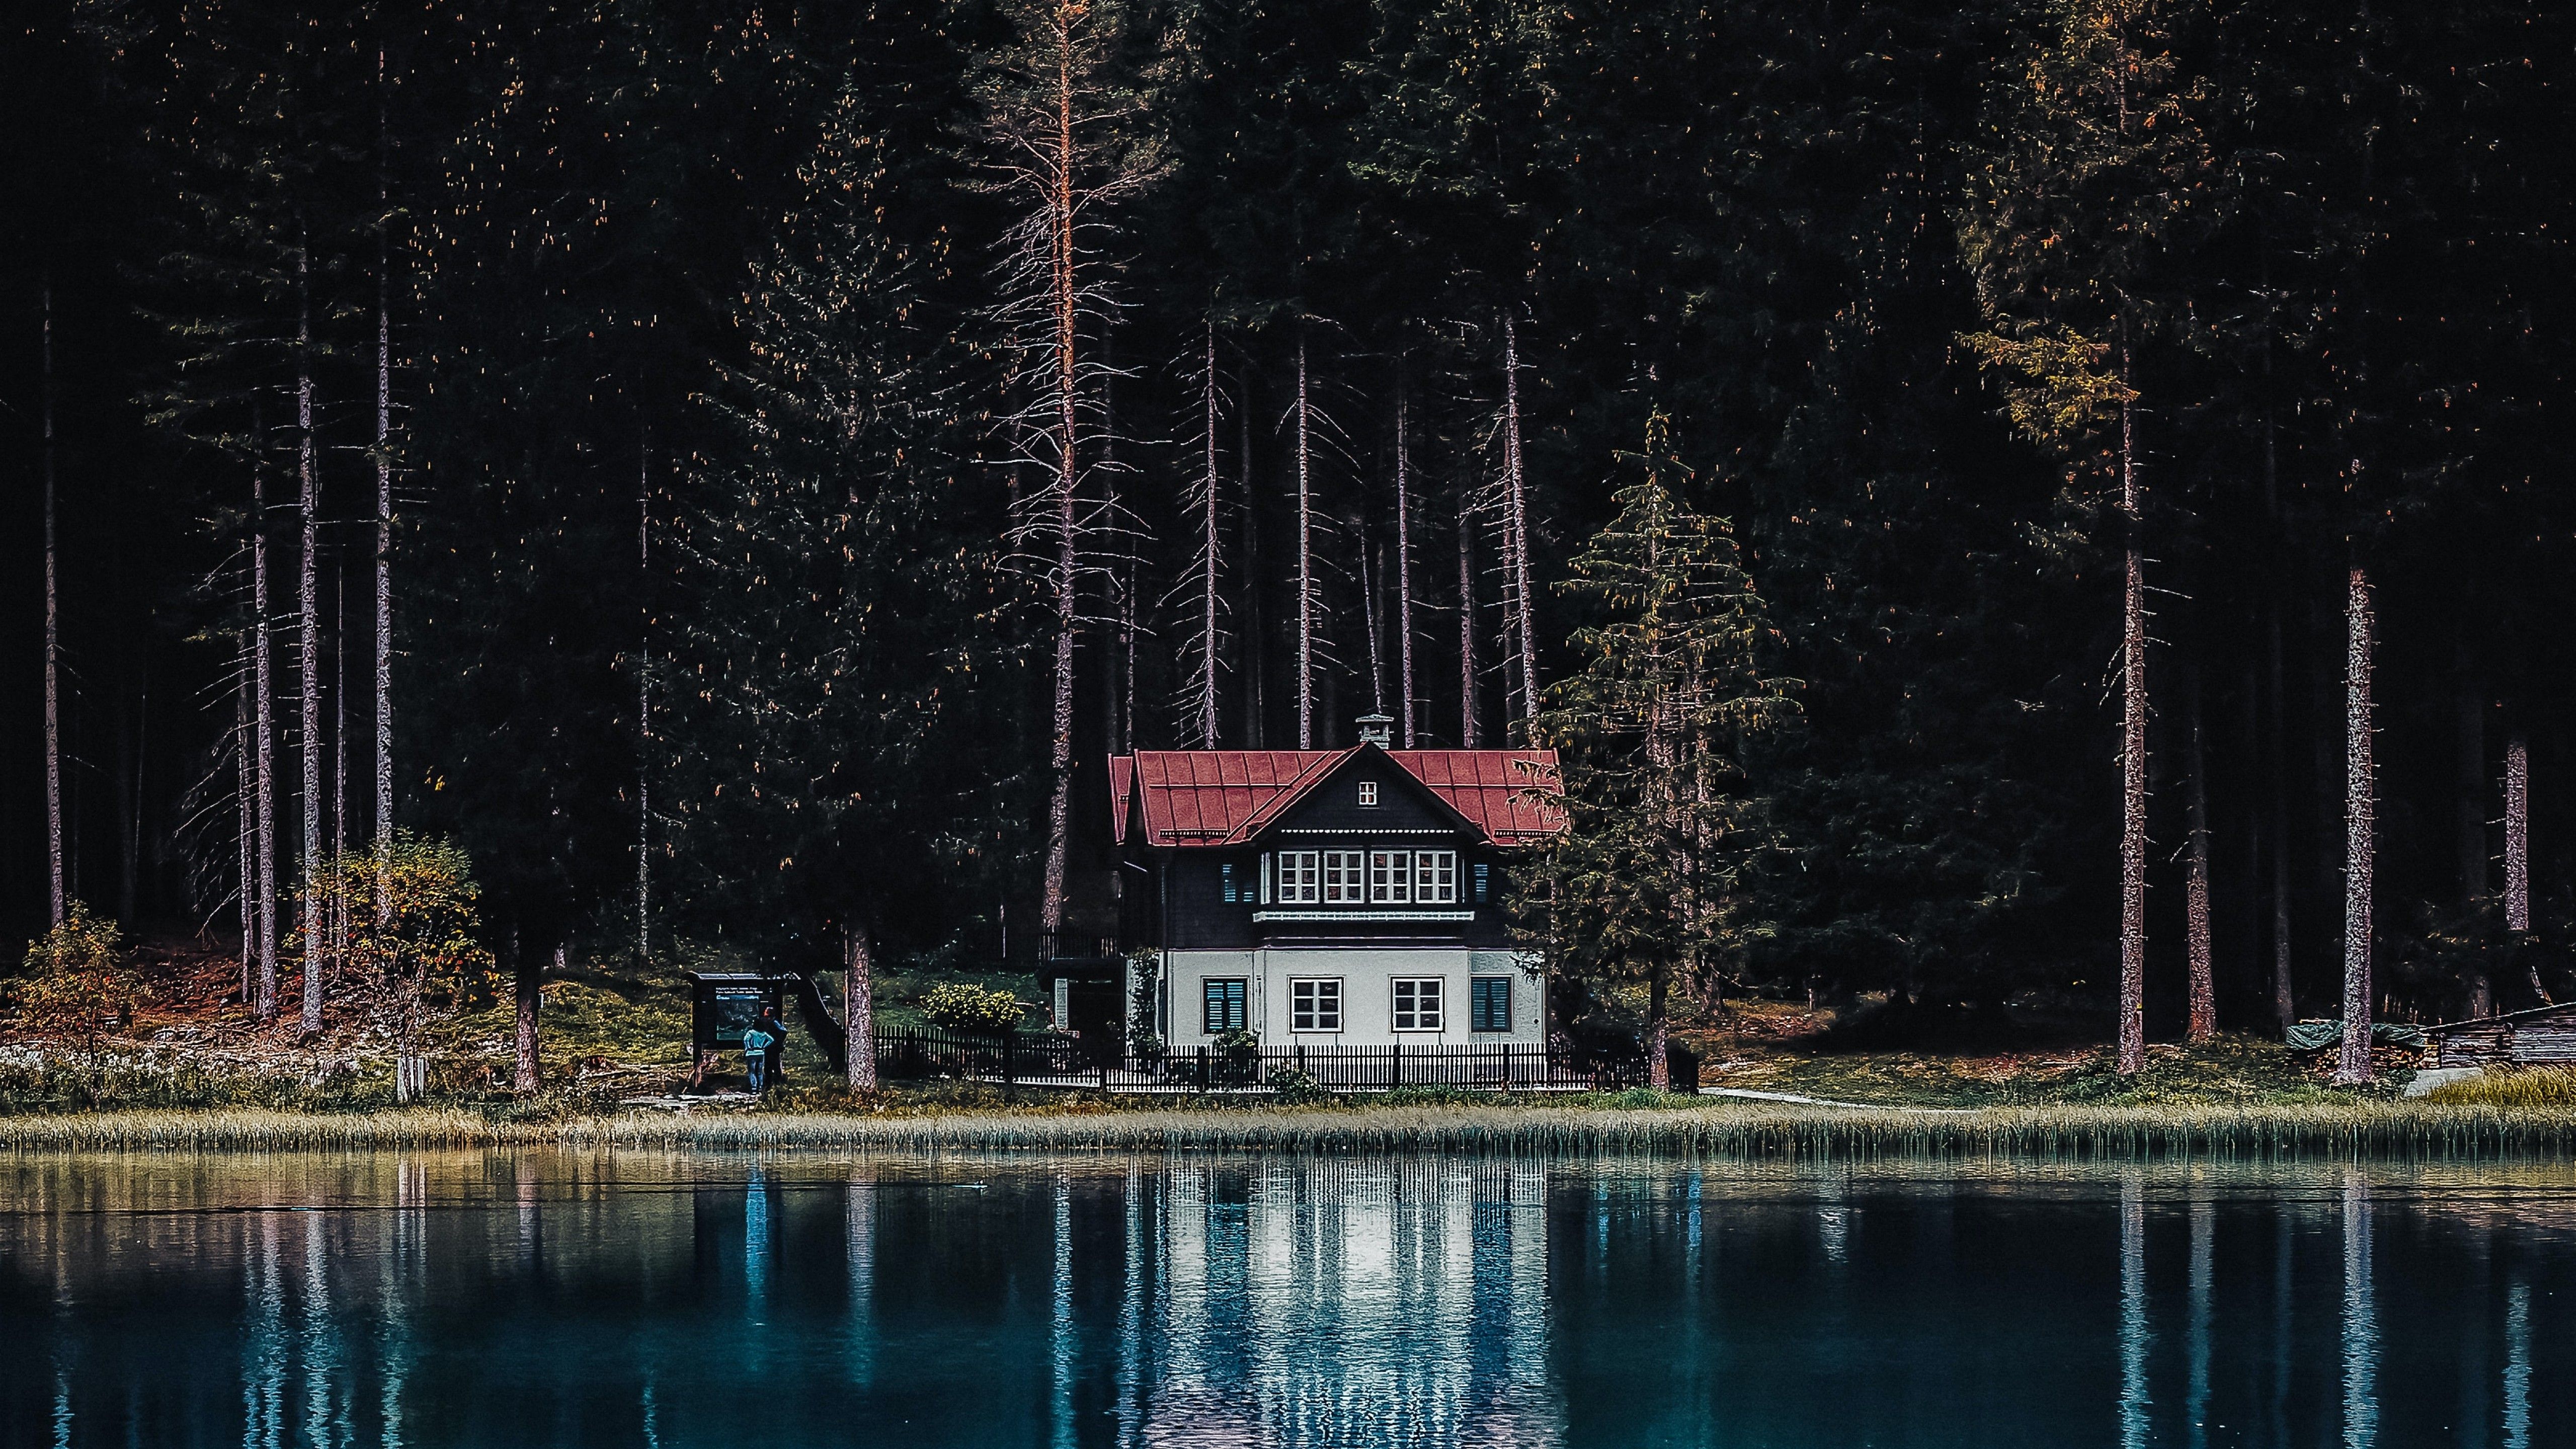 Dark Forest 4K Wallpaper, House, Tall Trees, Woods, Lake, Body of Water, Reflection, Landscape, Nature